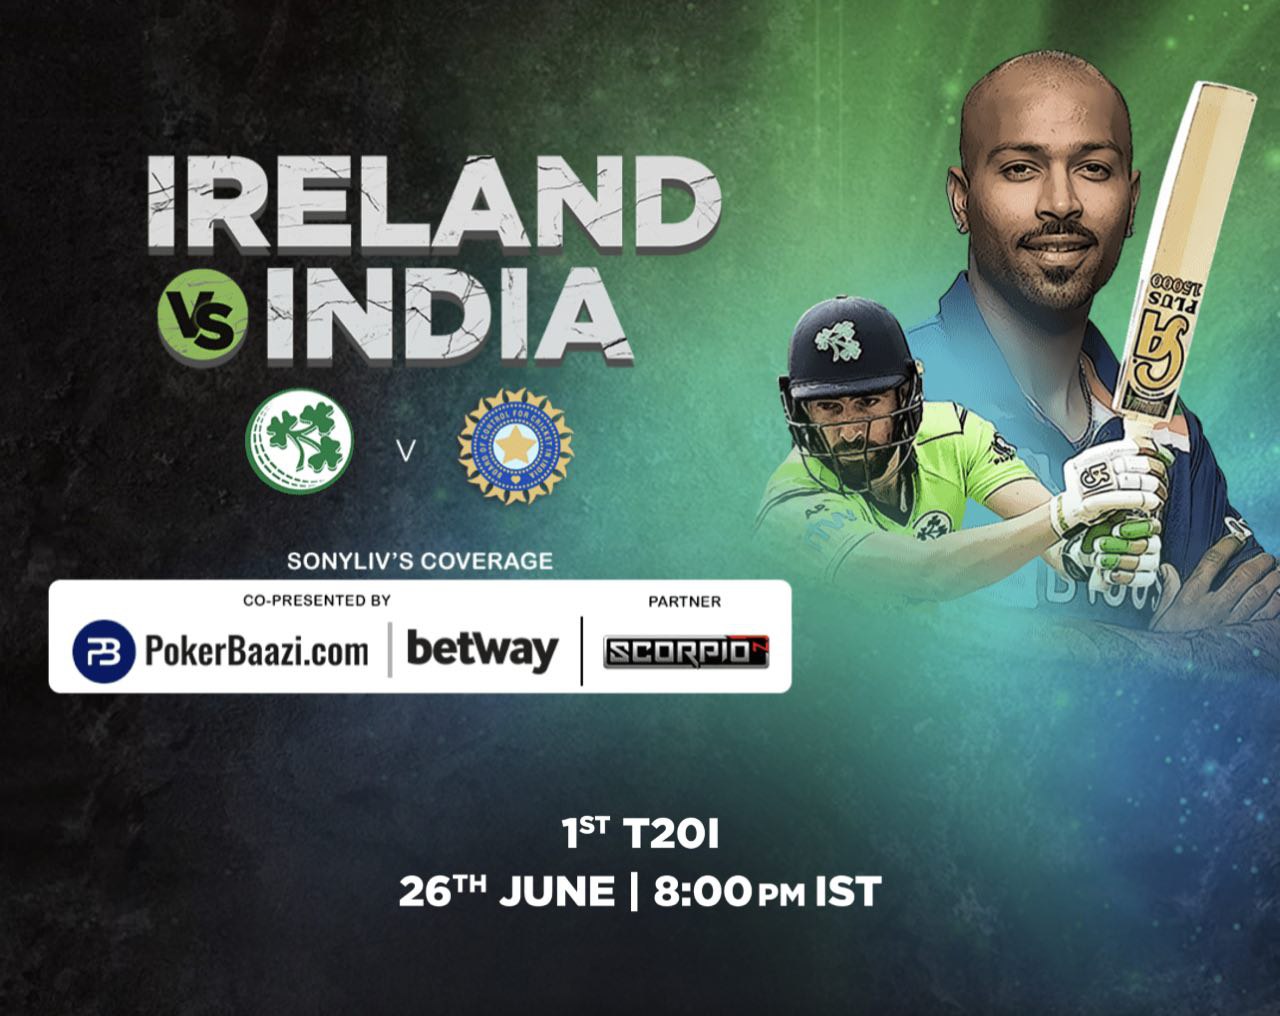 How to Watch India vs Ireland 2nd T20 Match FREE on SonyLIV